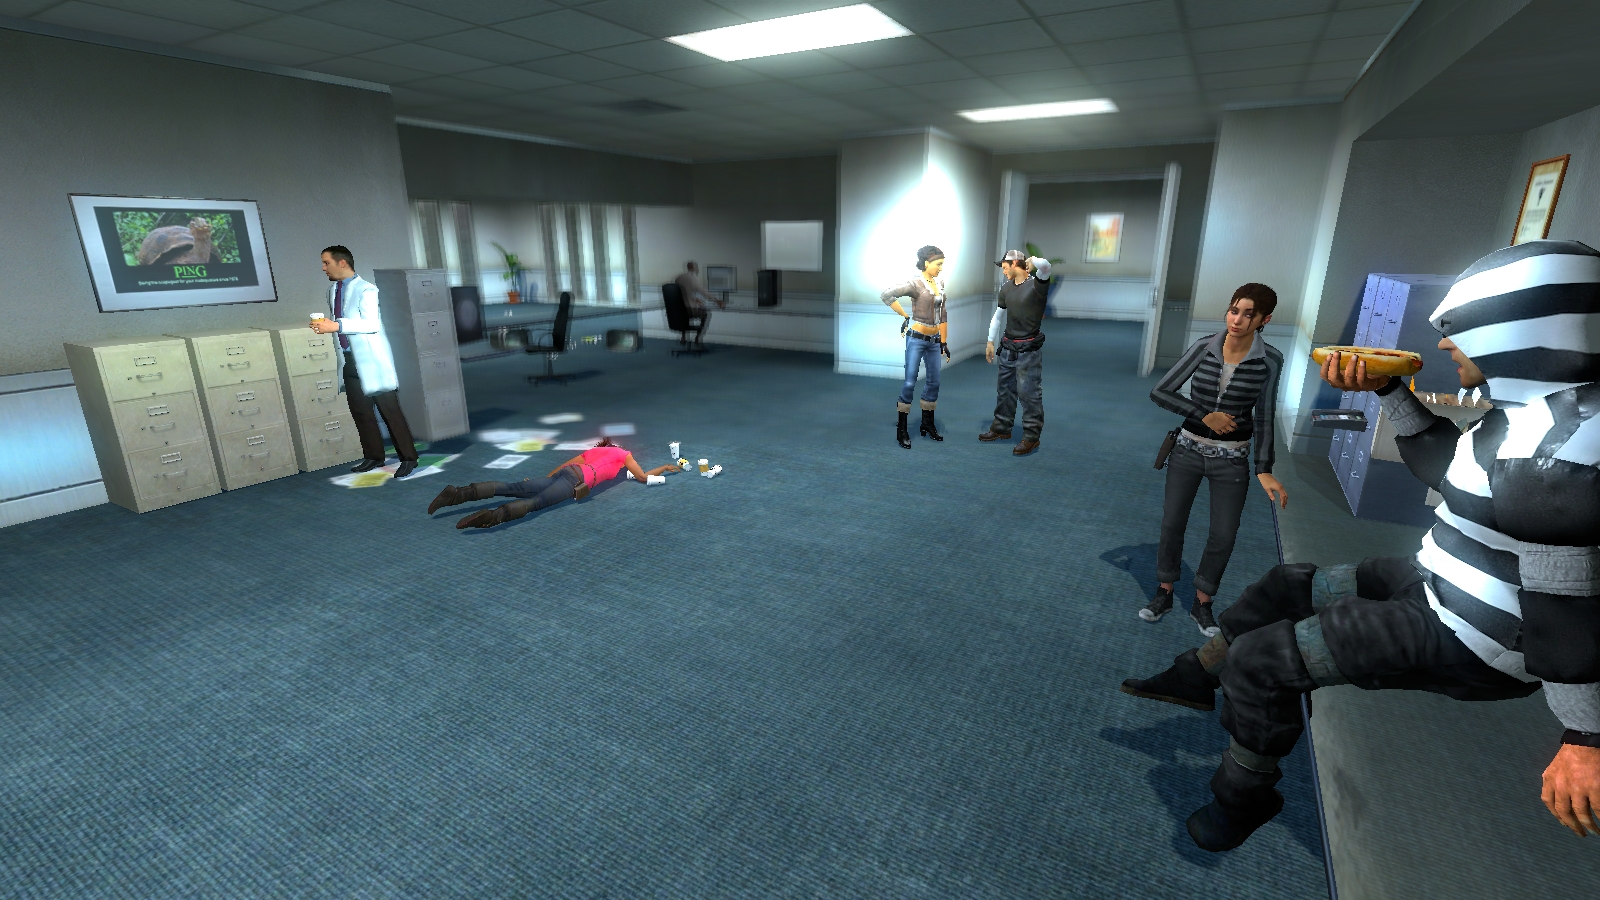 Late at The Office image - Garry's Mod.